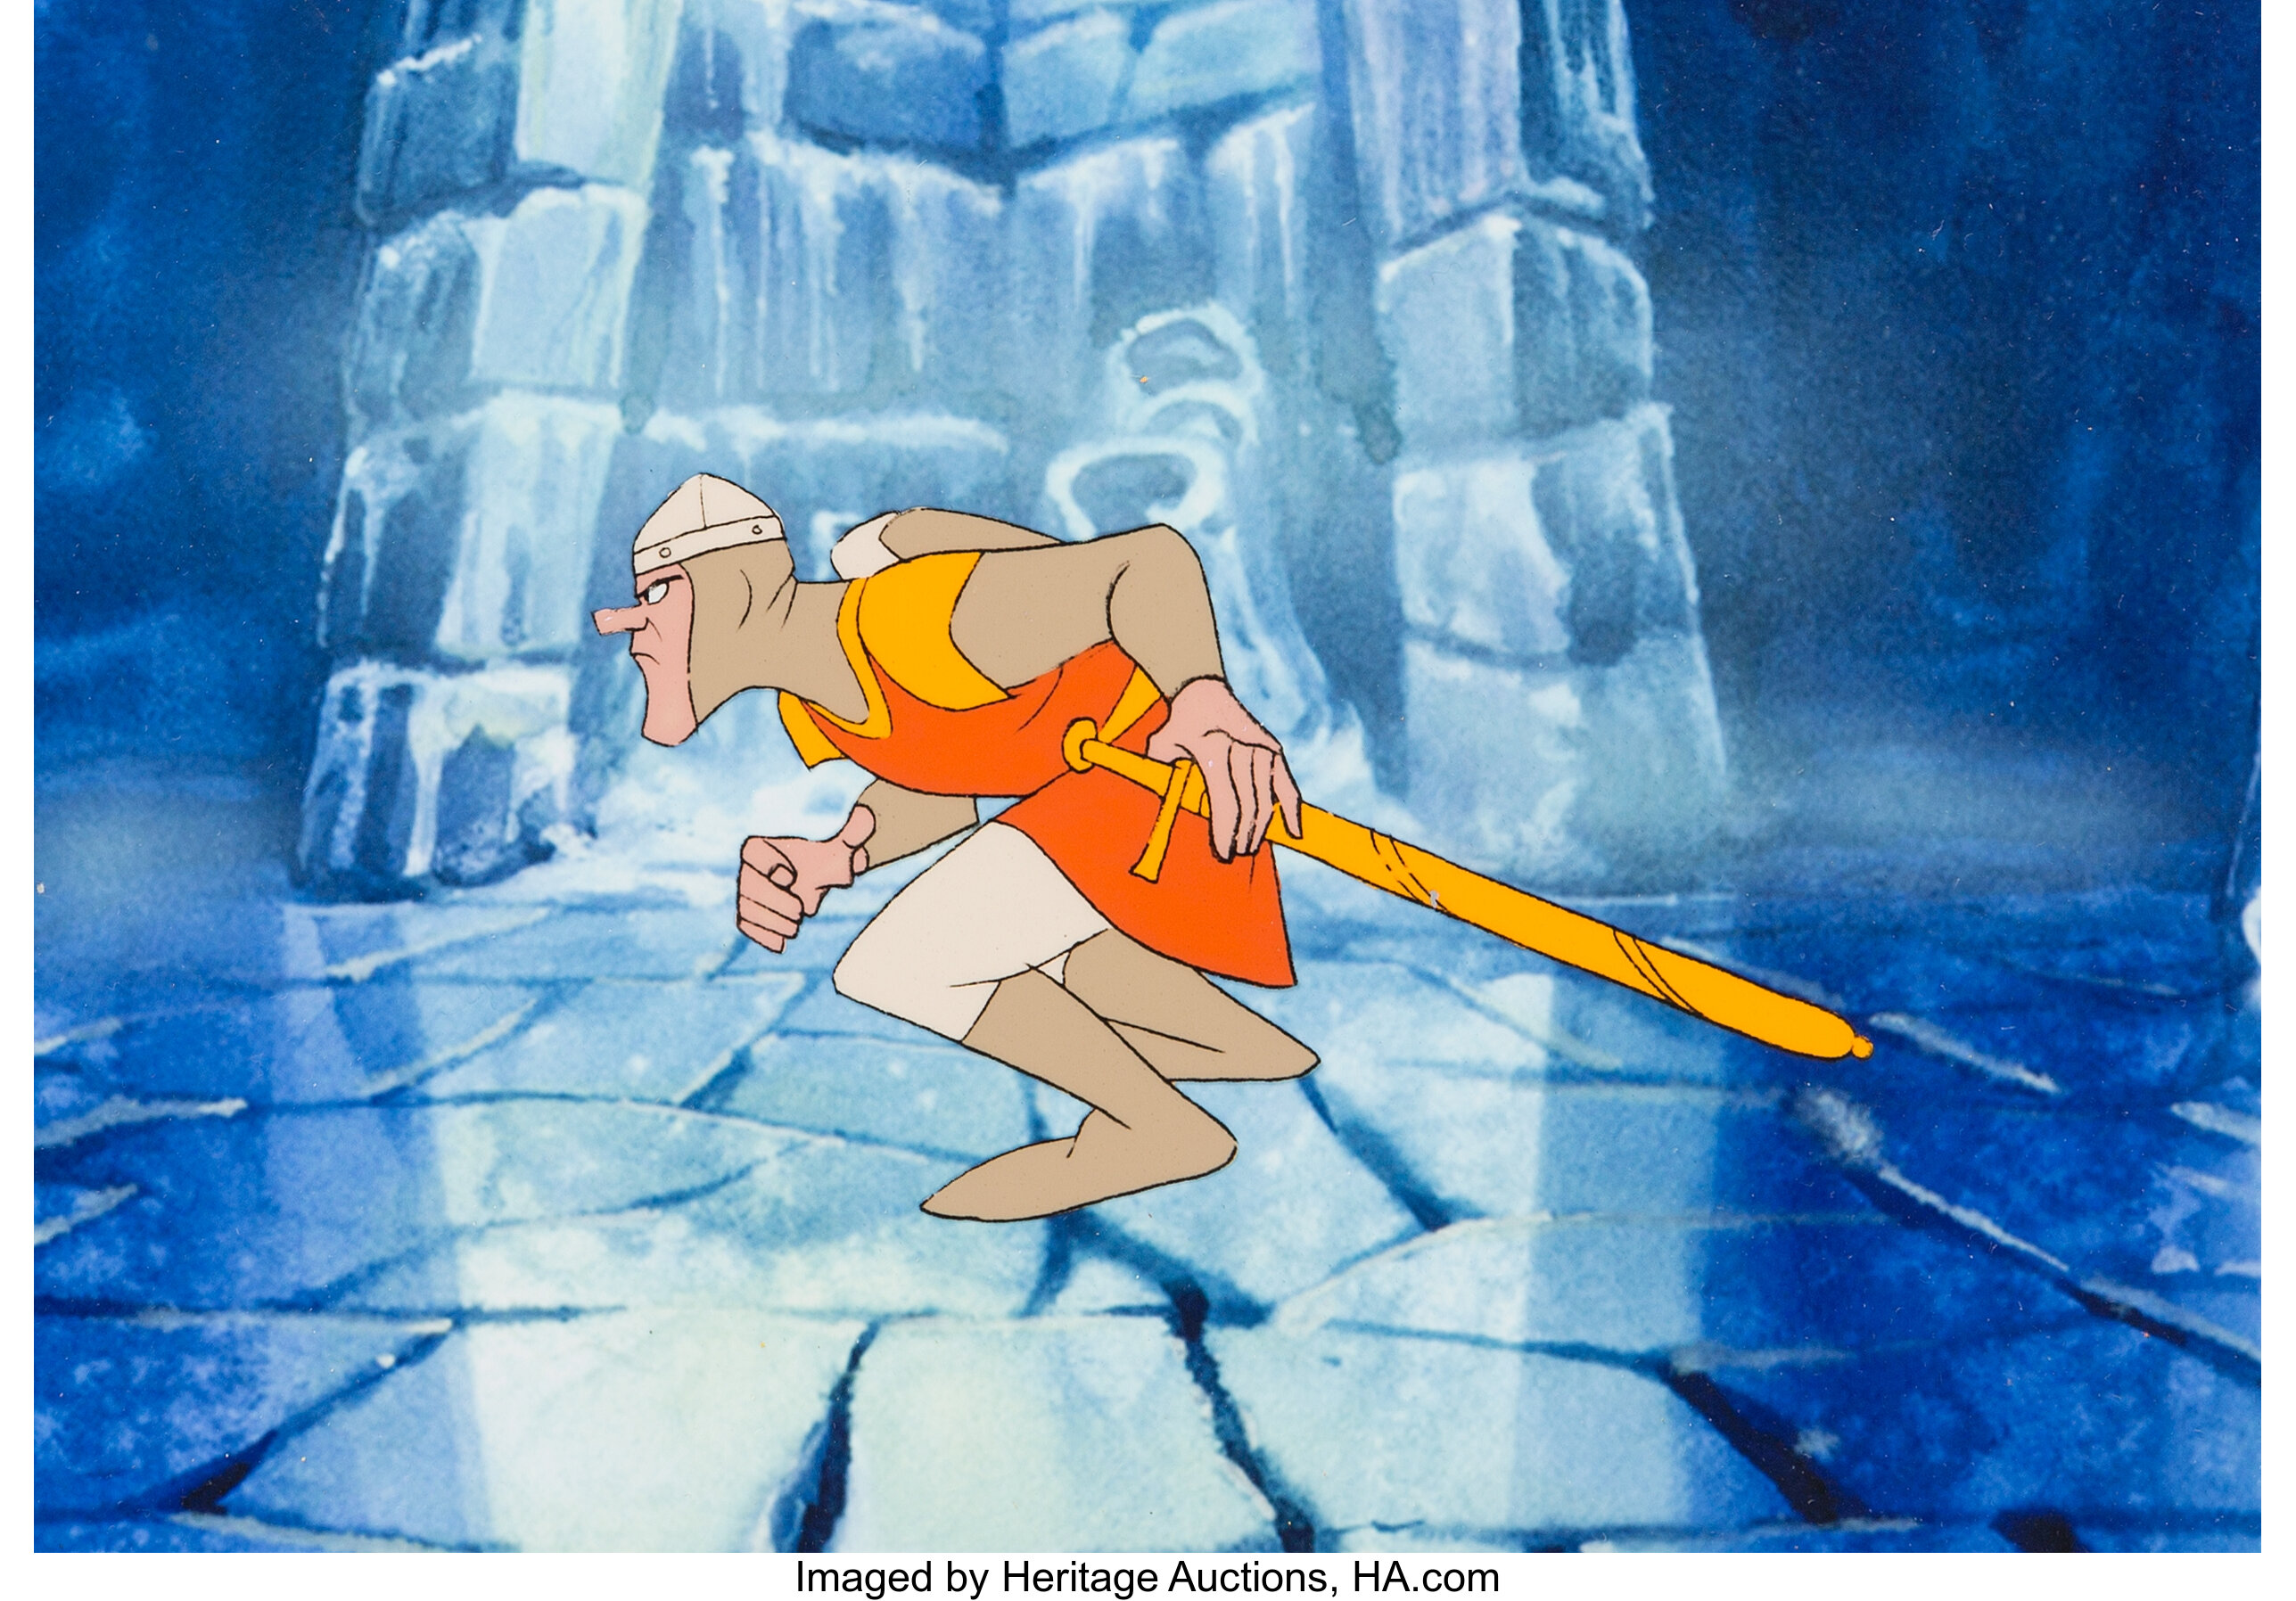 Dragon S Lair Dirk The Daring Production Cel Video Game Art Don Lot 923 Heritage Auctions